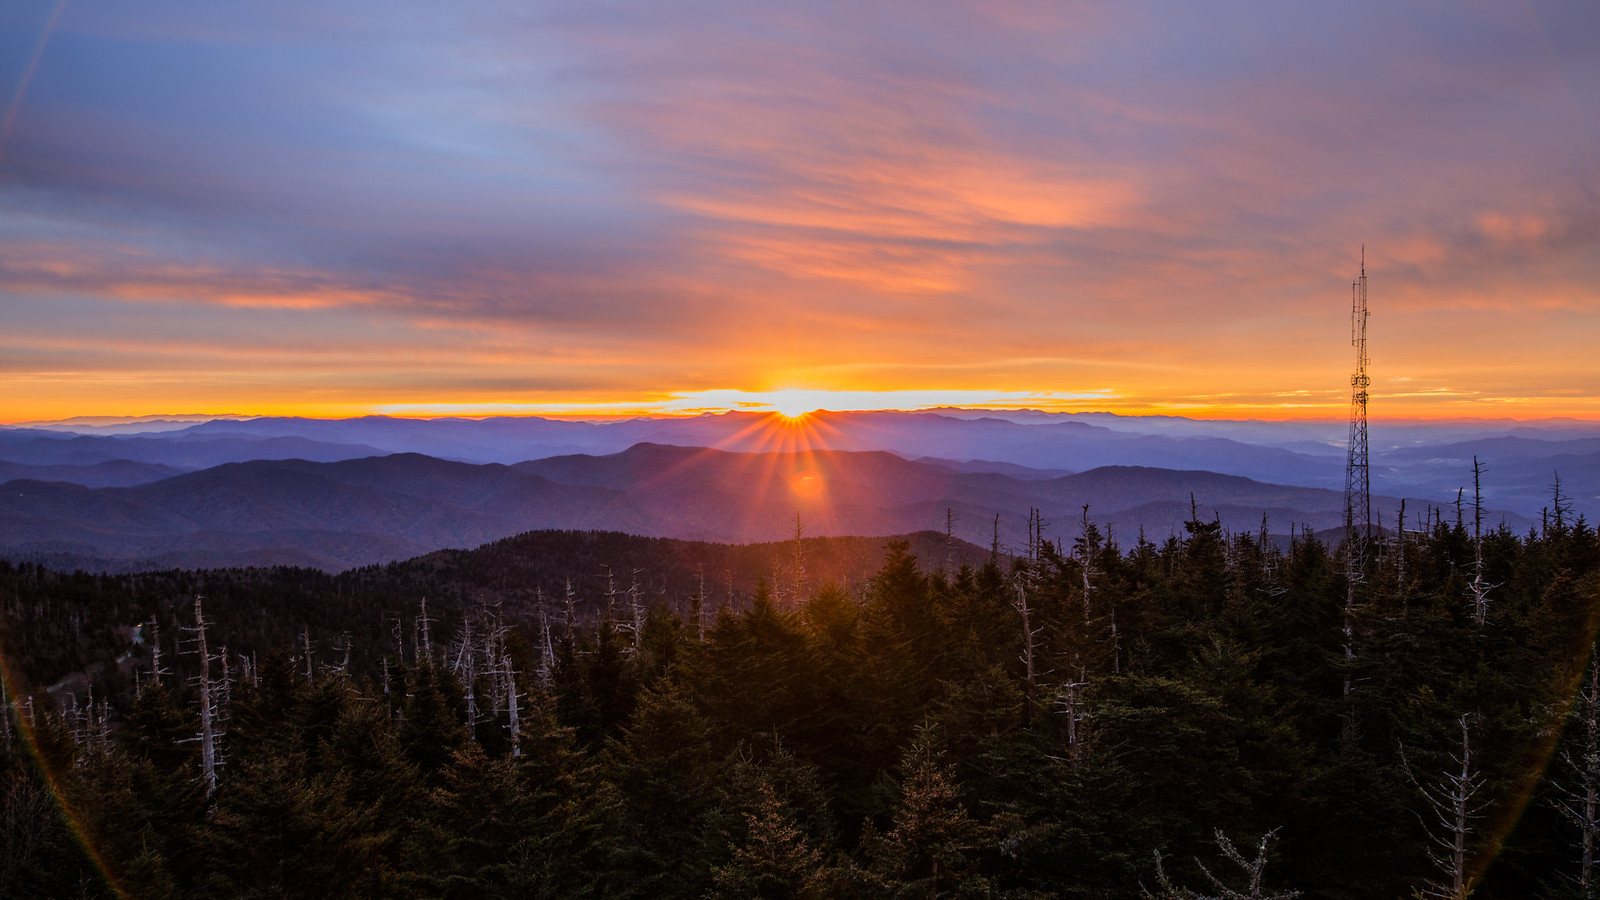 Sunrise at Great Smoky Mountains